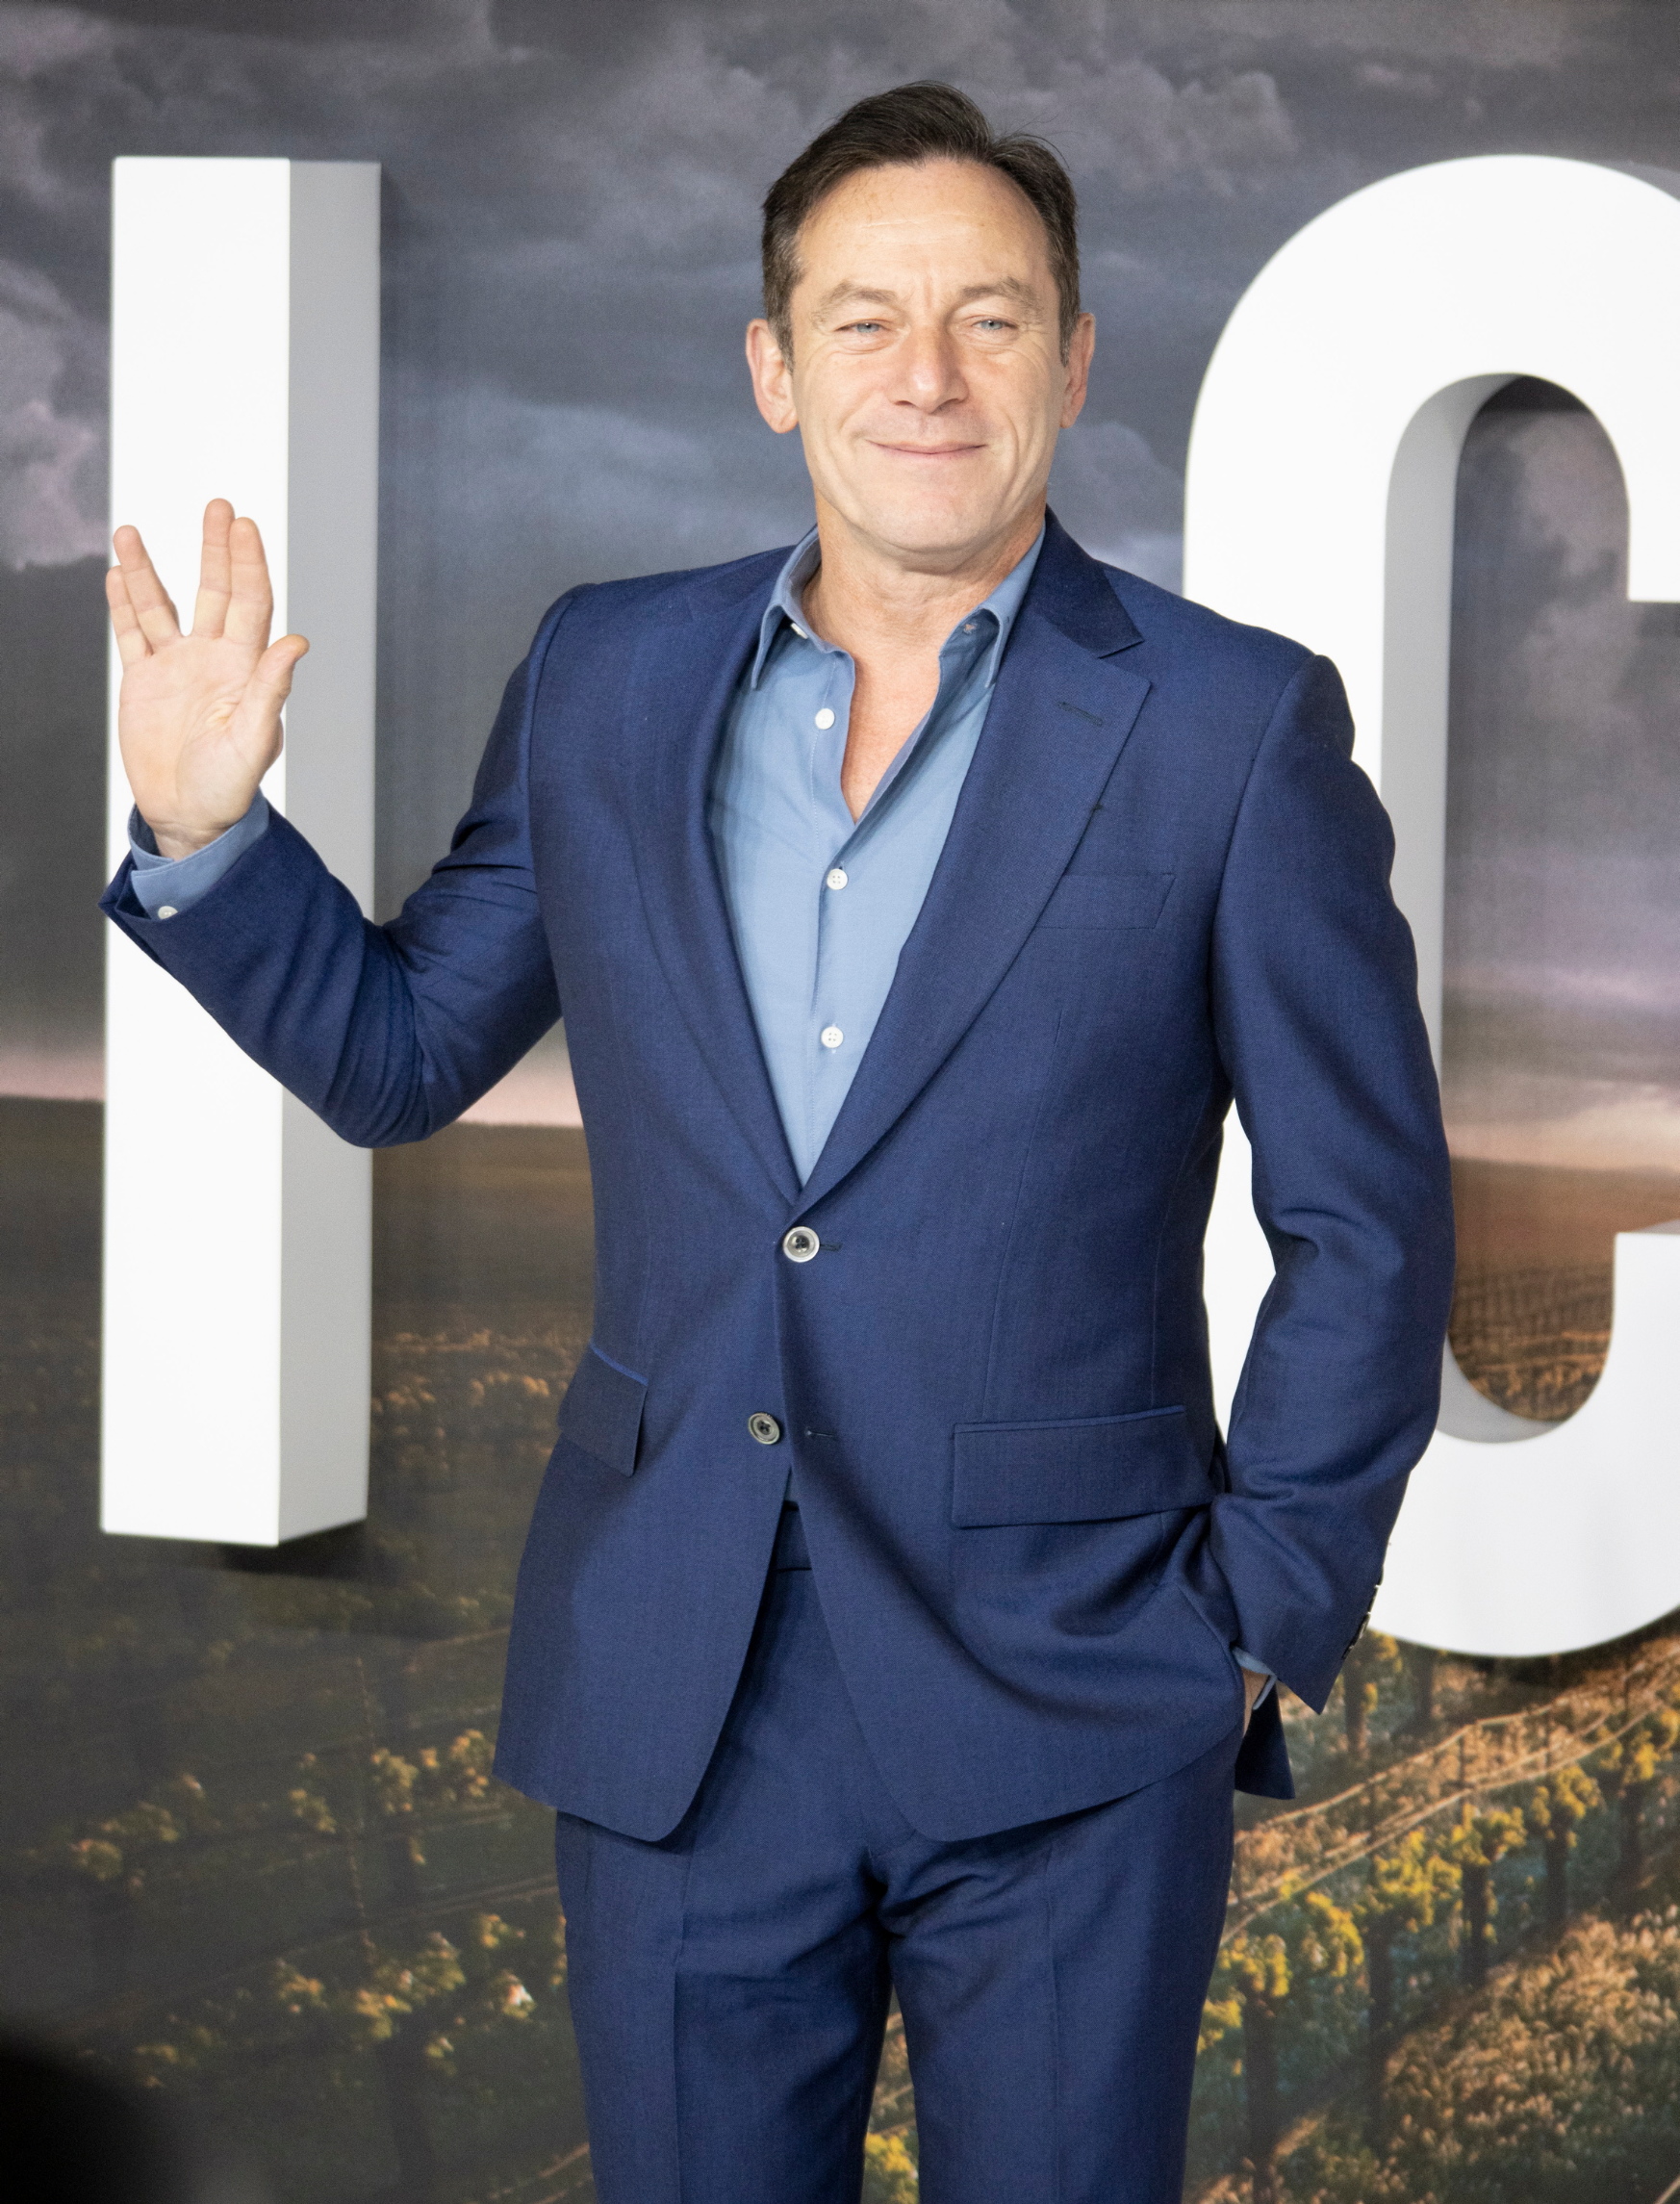 Jason Isaacs attending the UK Premiere of Star Trek: Picard  at the Odeon Luxe in Leicester Square, London,Image: 493176853, License: Rights-managed, Restrictions: WORLD RIGHTS - Fee Payable Upon Reproduction - For queries contact Avalon.red - sales@avalon.red London: +44 (0) 20 7421 6000 Los Angeles: +1 (310) 822 0419 Berlin: +49 (0) 30 76 212 251, Model Release: no, Credit line: Retna/Avalon.red / Avalon Editorial / Profimedia